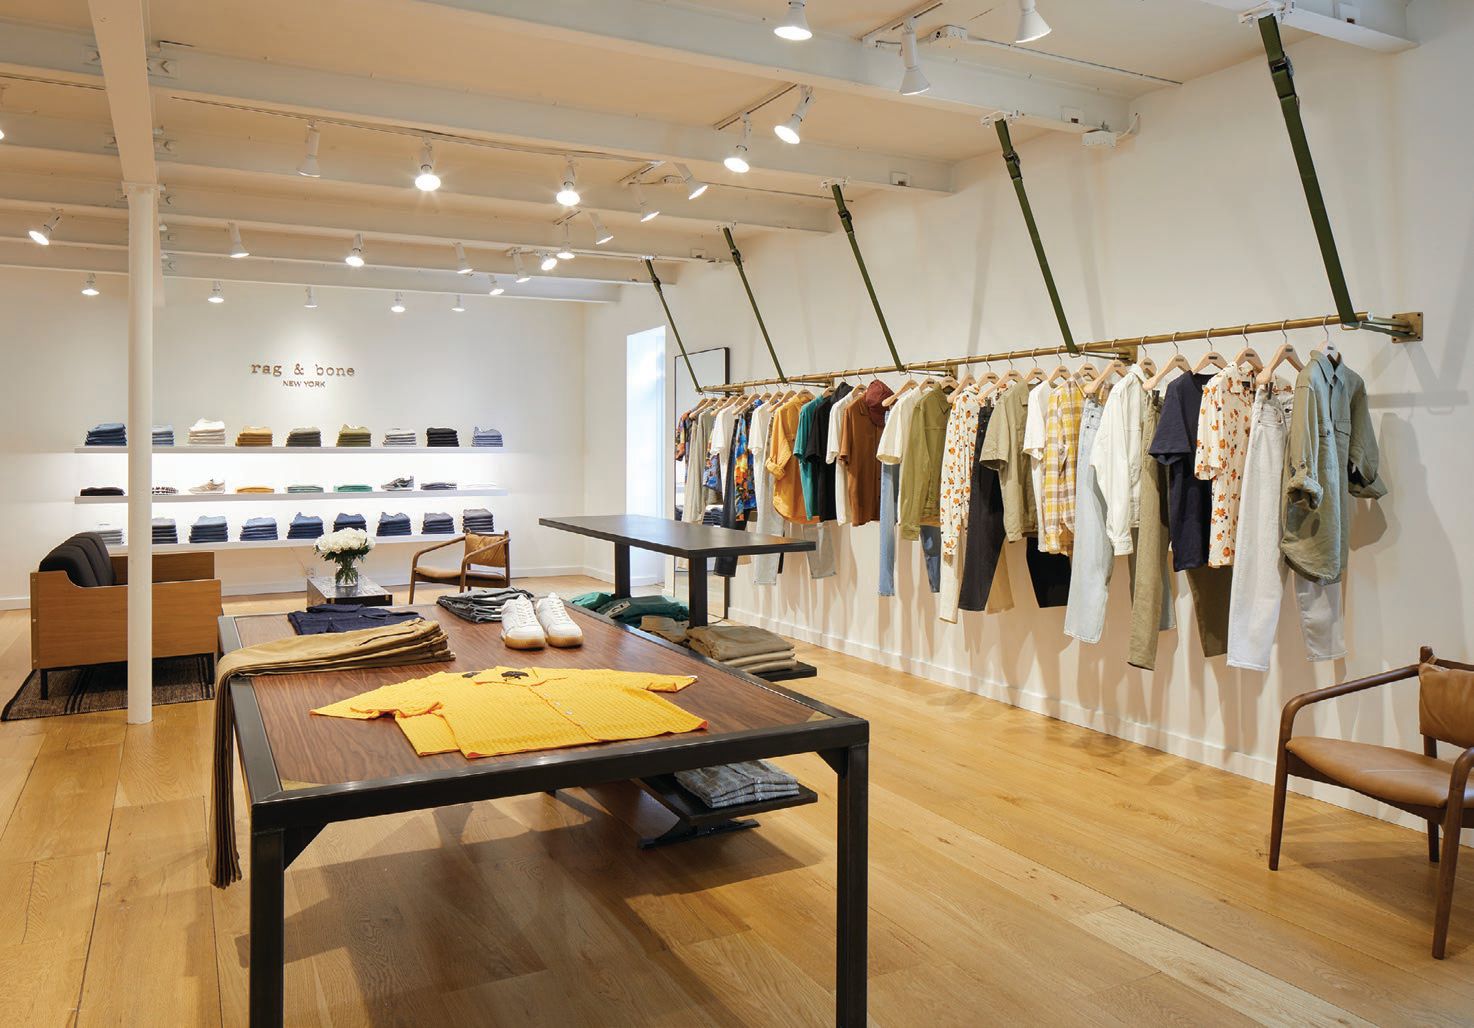 Inside the new Rag & Bone store. STORE PHOTO COURTESY OF THE BRAND